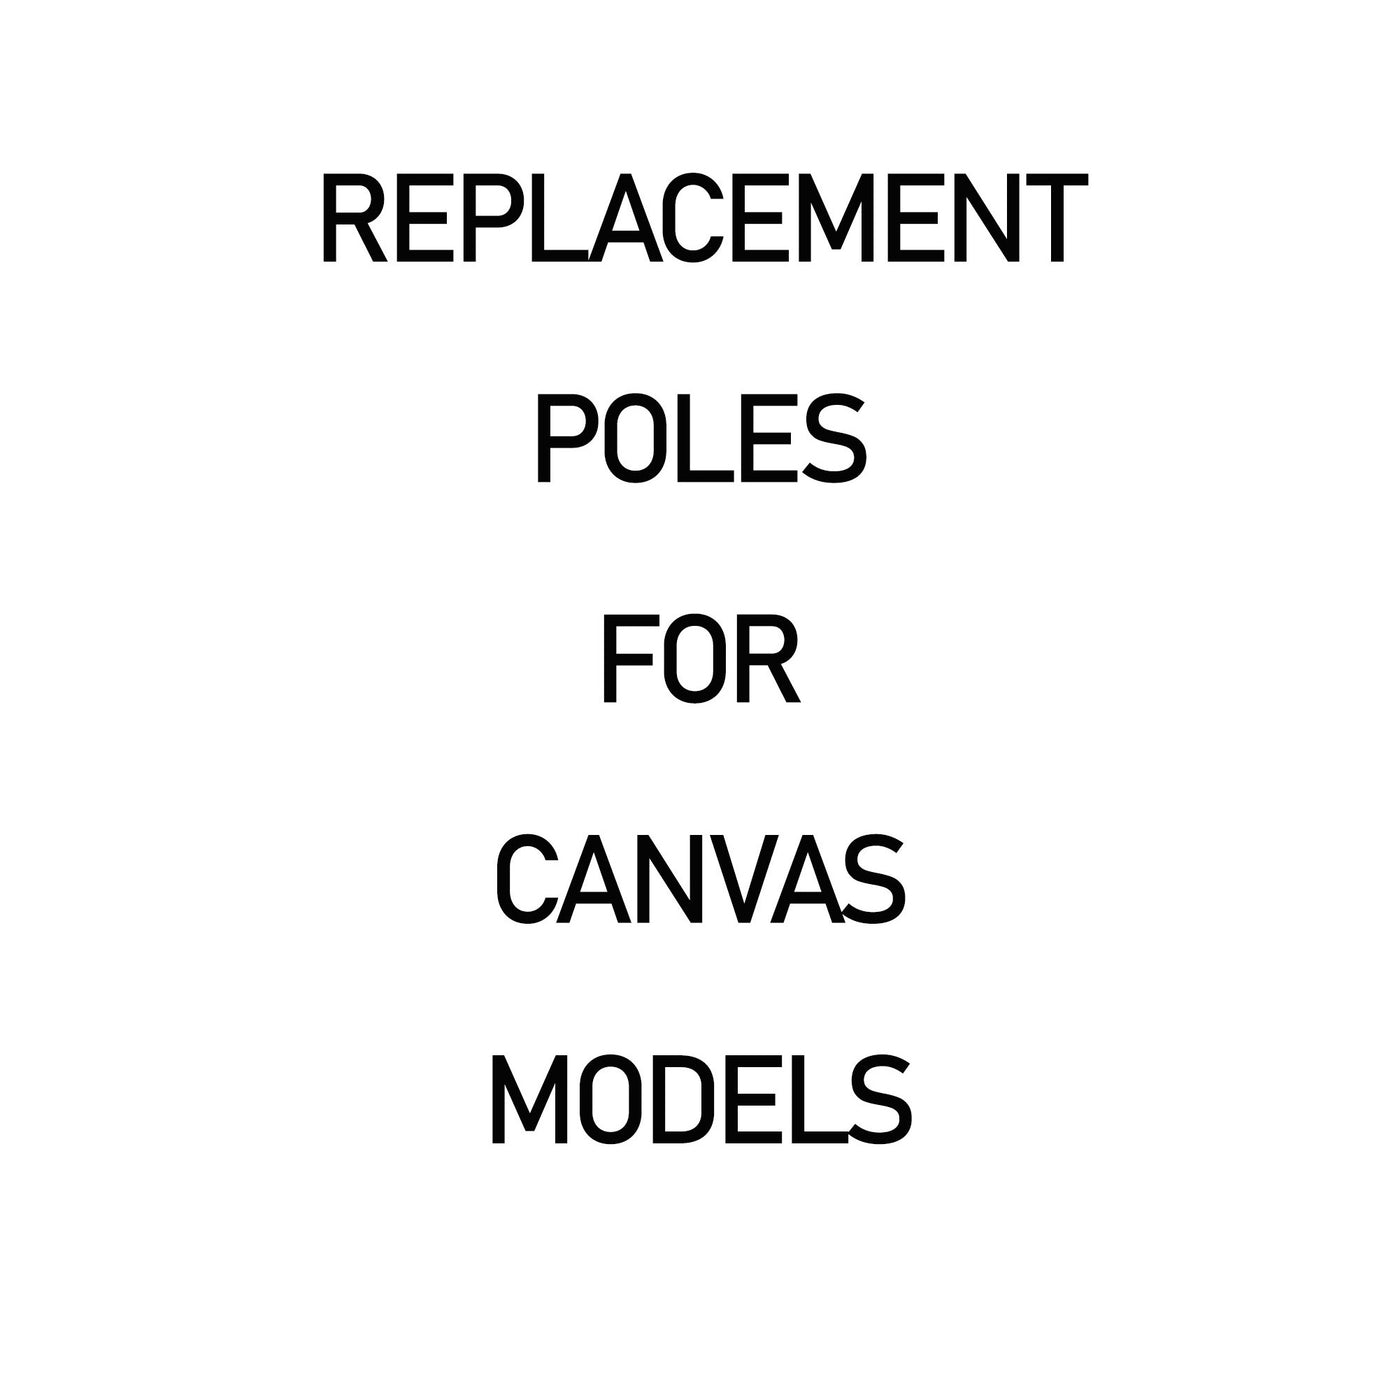 Replacement Poles for Canvas Tents